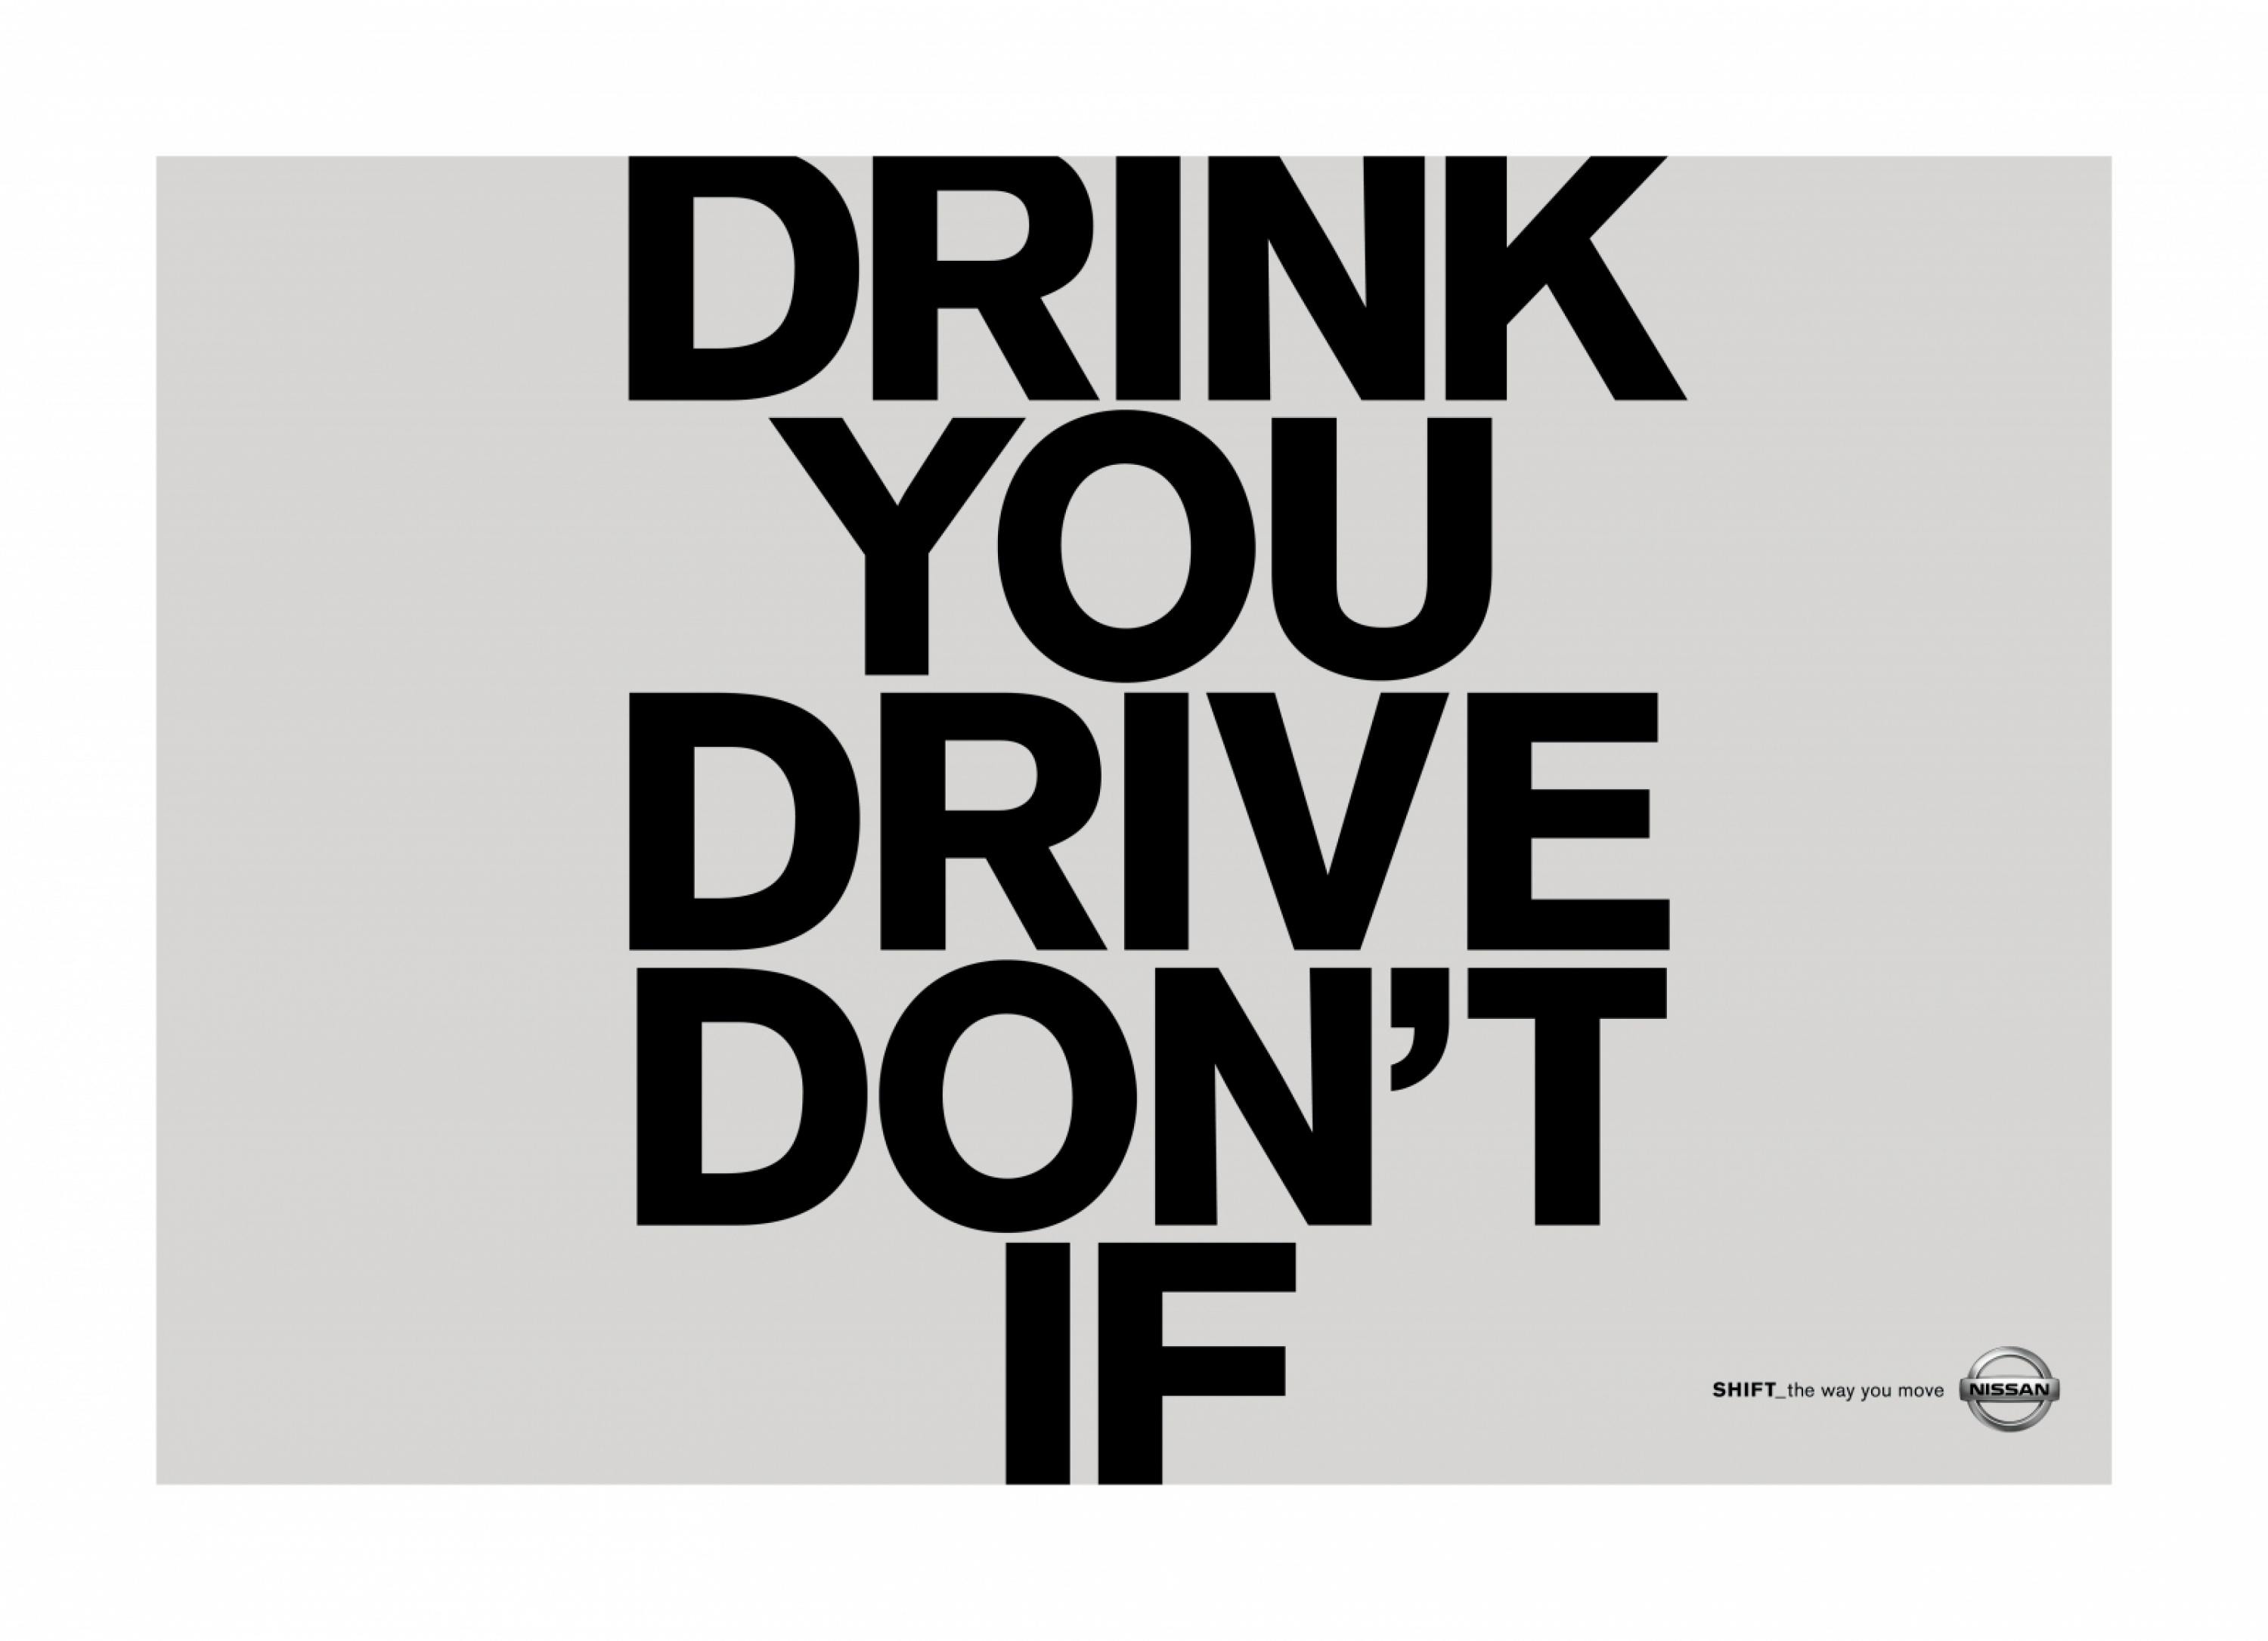 DON'T DRINK & DRIVE CAMPAIGN